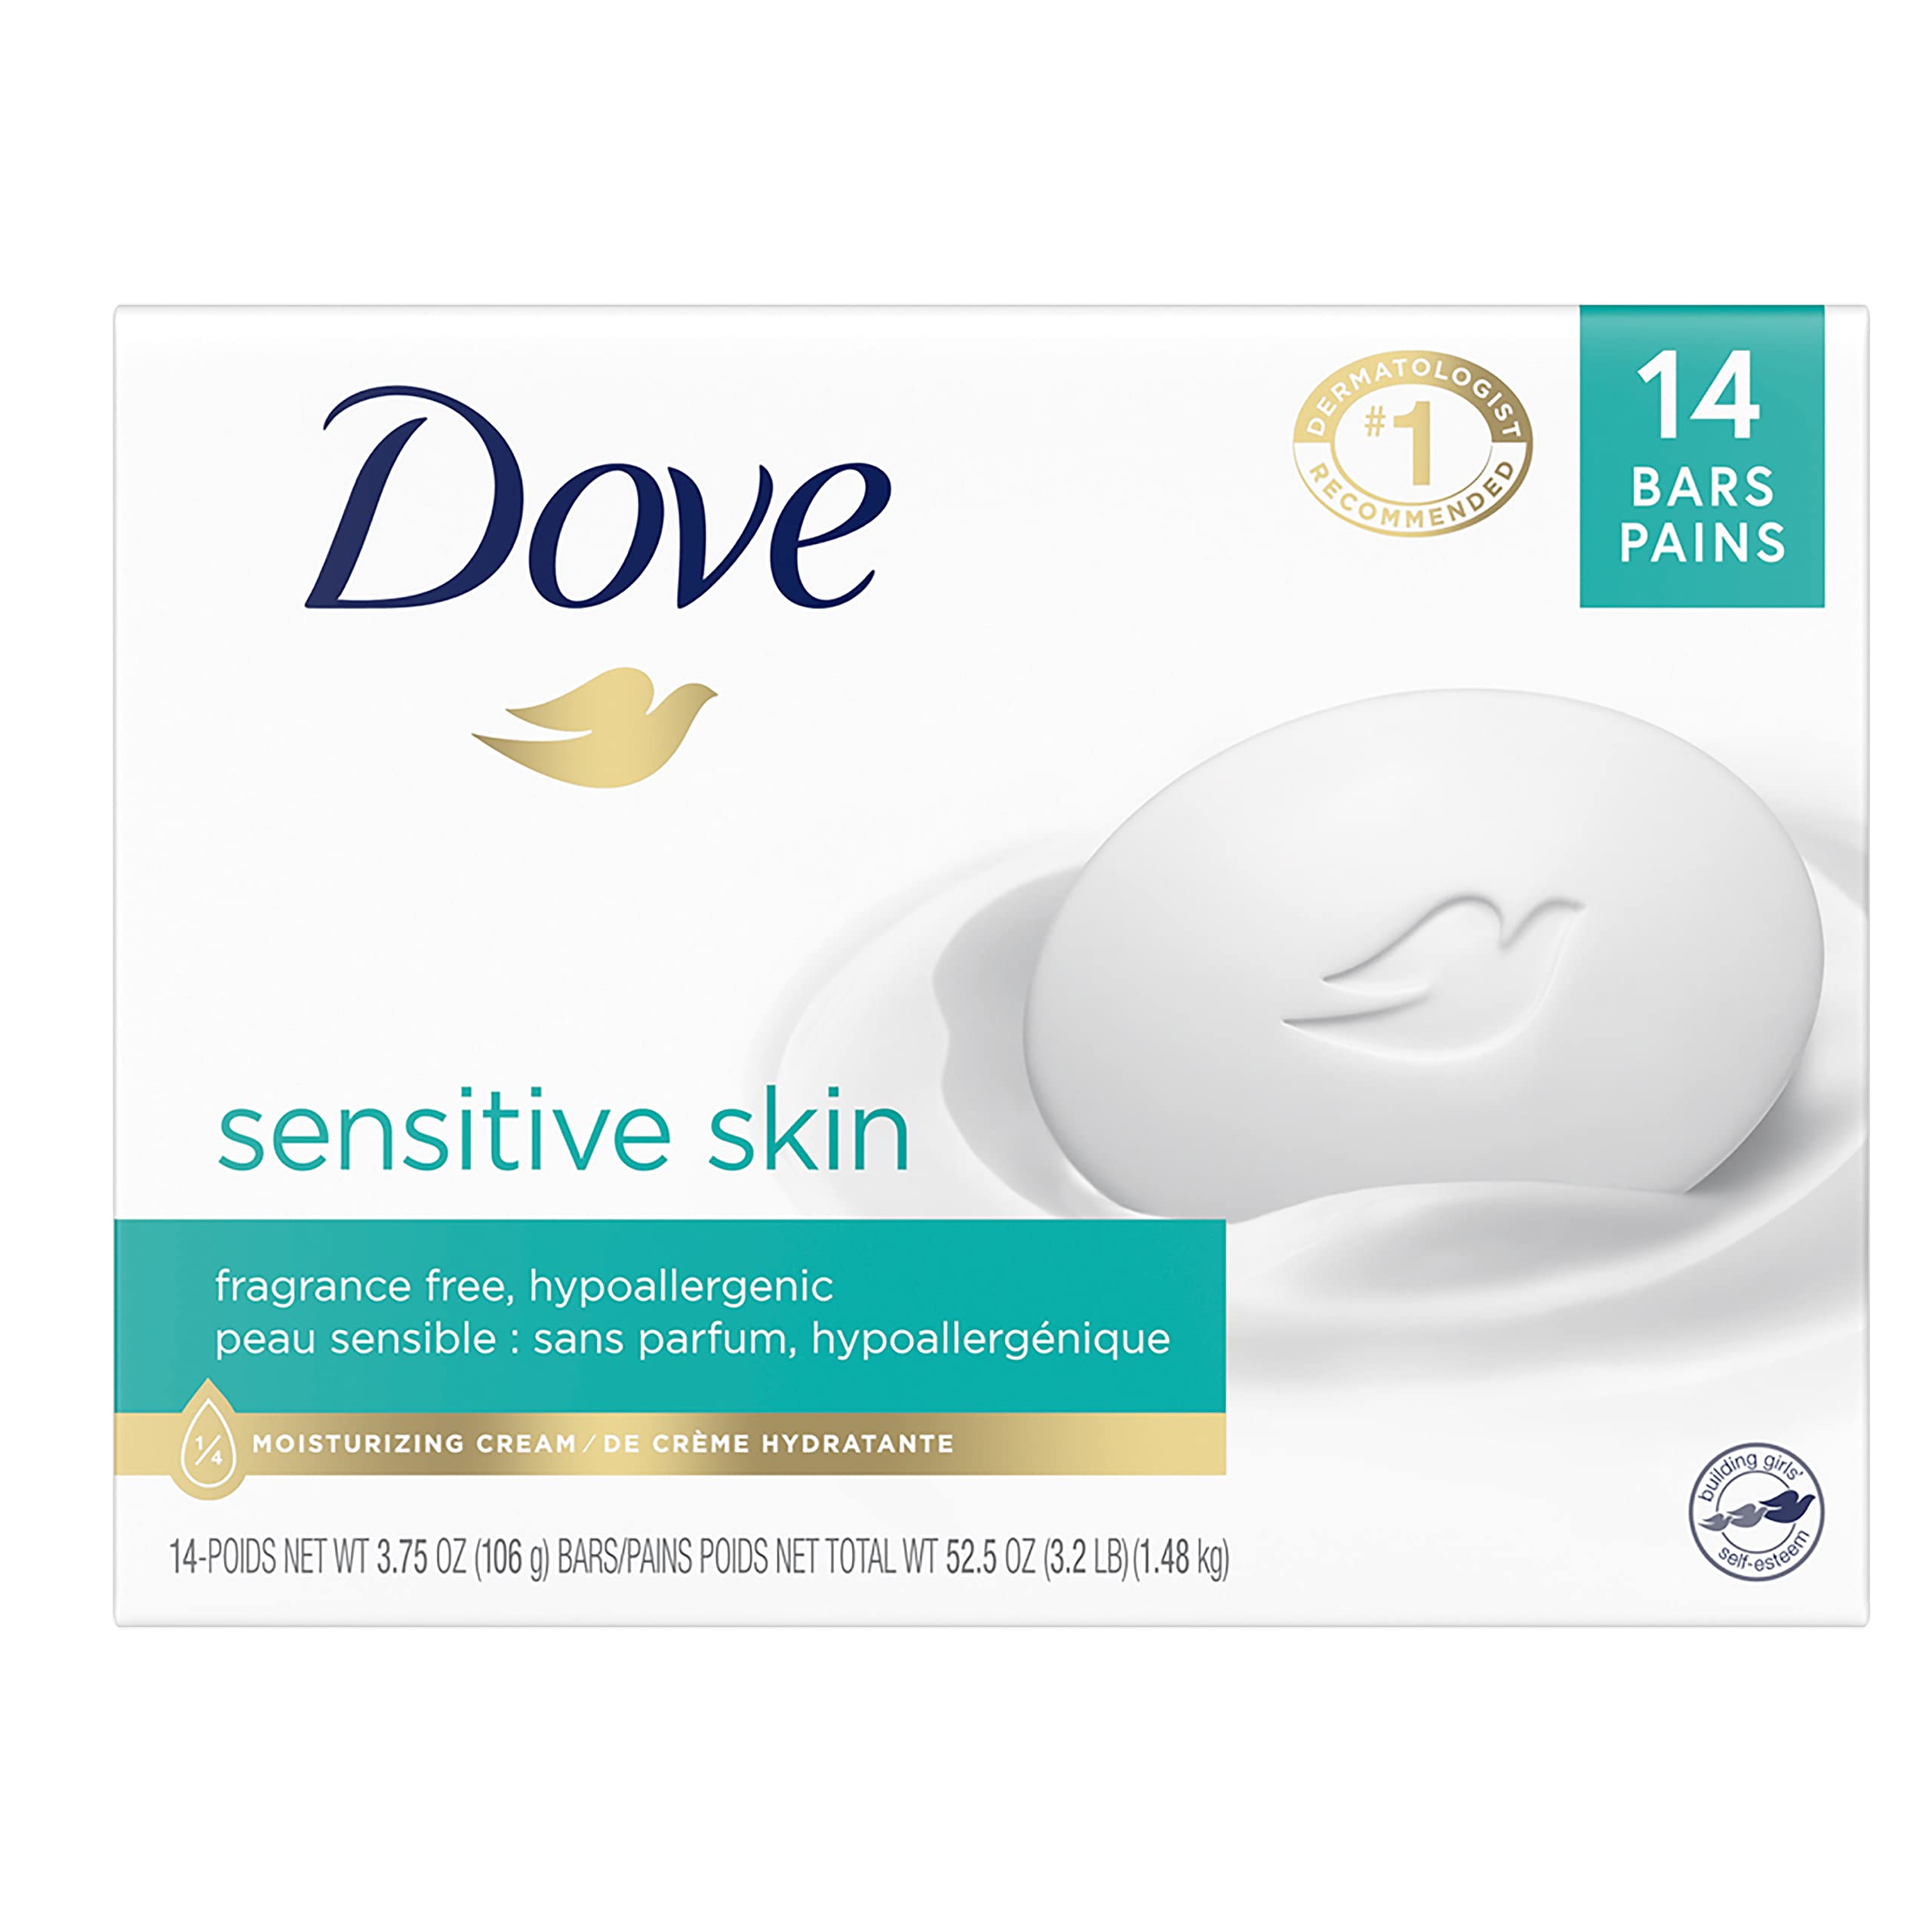 Dove Beauty Bar More Moisturizing Than Bar Soap for Softer Skin, Fragrance-Free, Hypoallergenic Beauty Bar Sensitive Skin With Gentle Cleanser 3.75 oz, 14 Bars - $12.24 Amazon